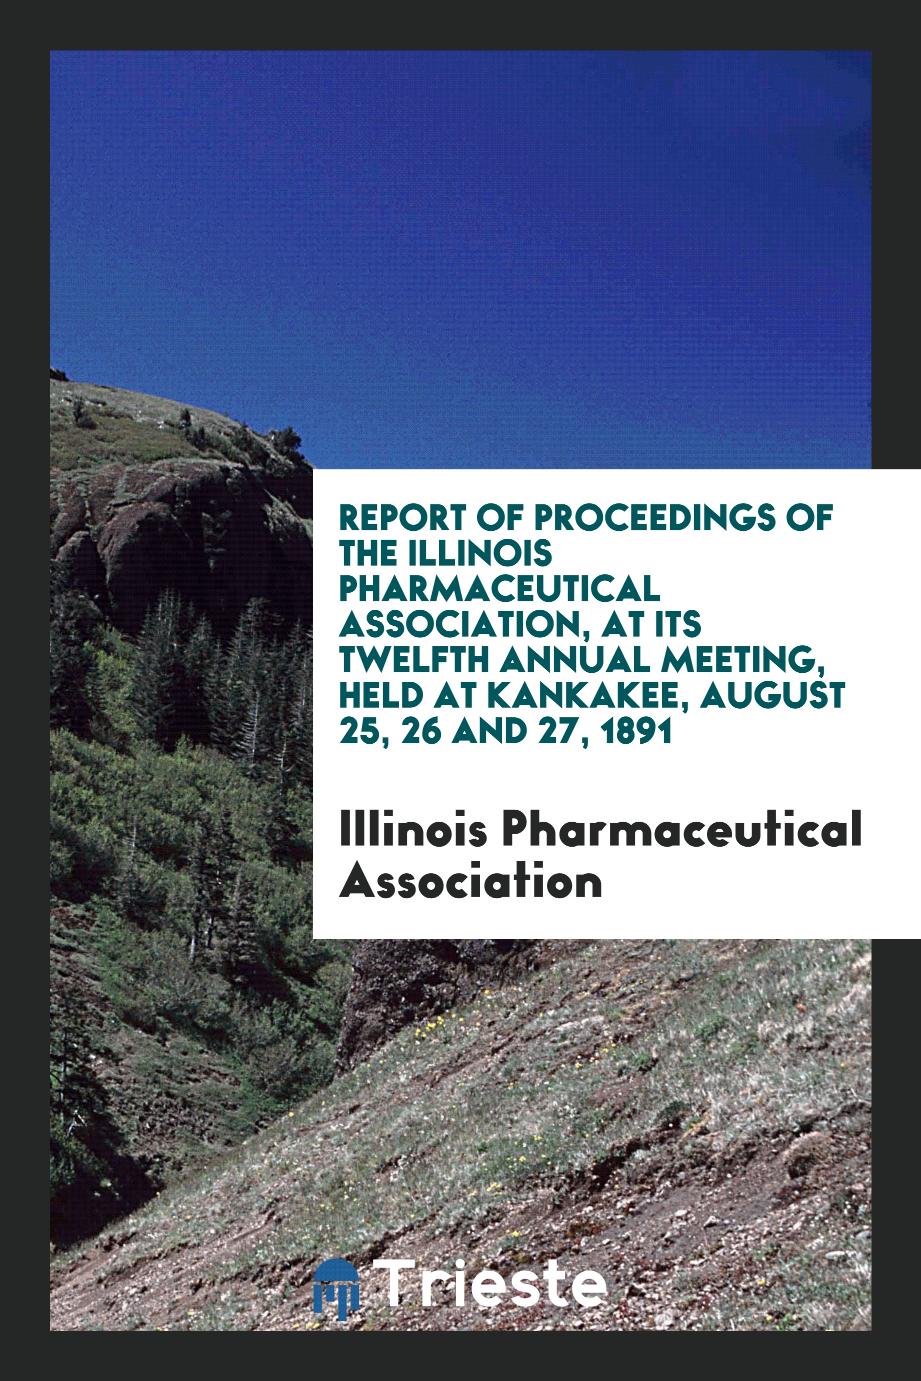 Report of Proceedings of the Illinois Pharmaceutical Association, at Its Twelfth Annual Meeting, Held at Kankakee, August 25, 26 and 27, 1891